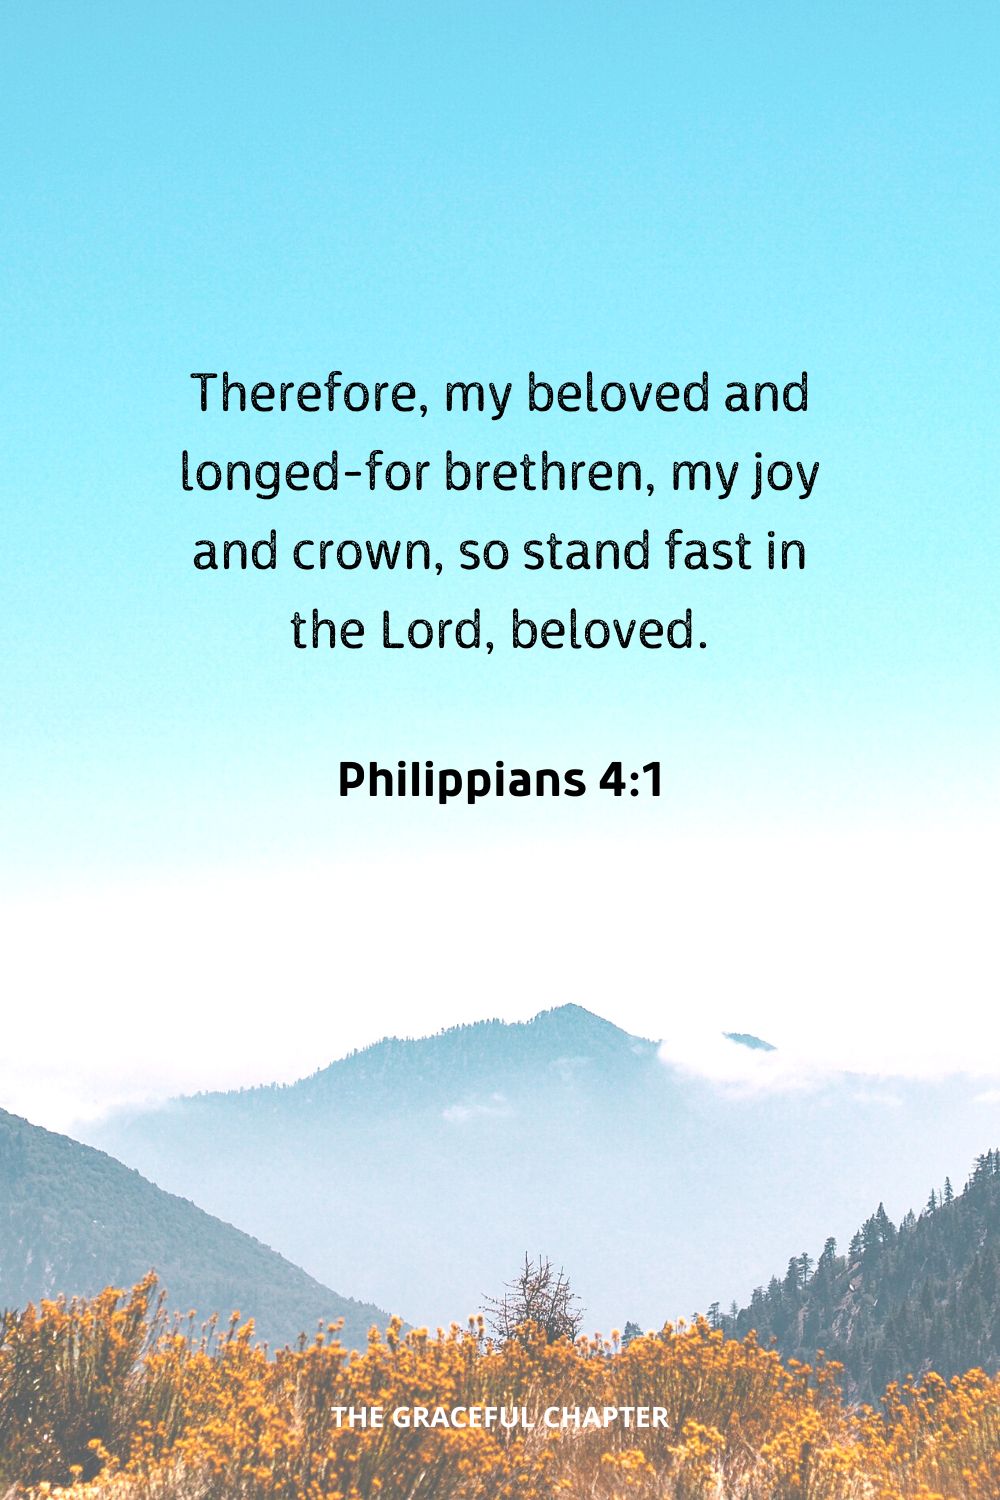 Therefore, my beloved and longed-for brethren, my joy and crown, so stand fast in the Lord, beloved.